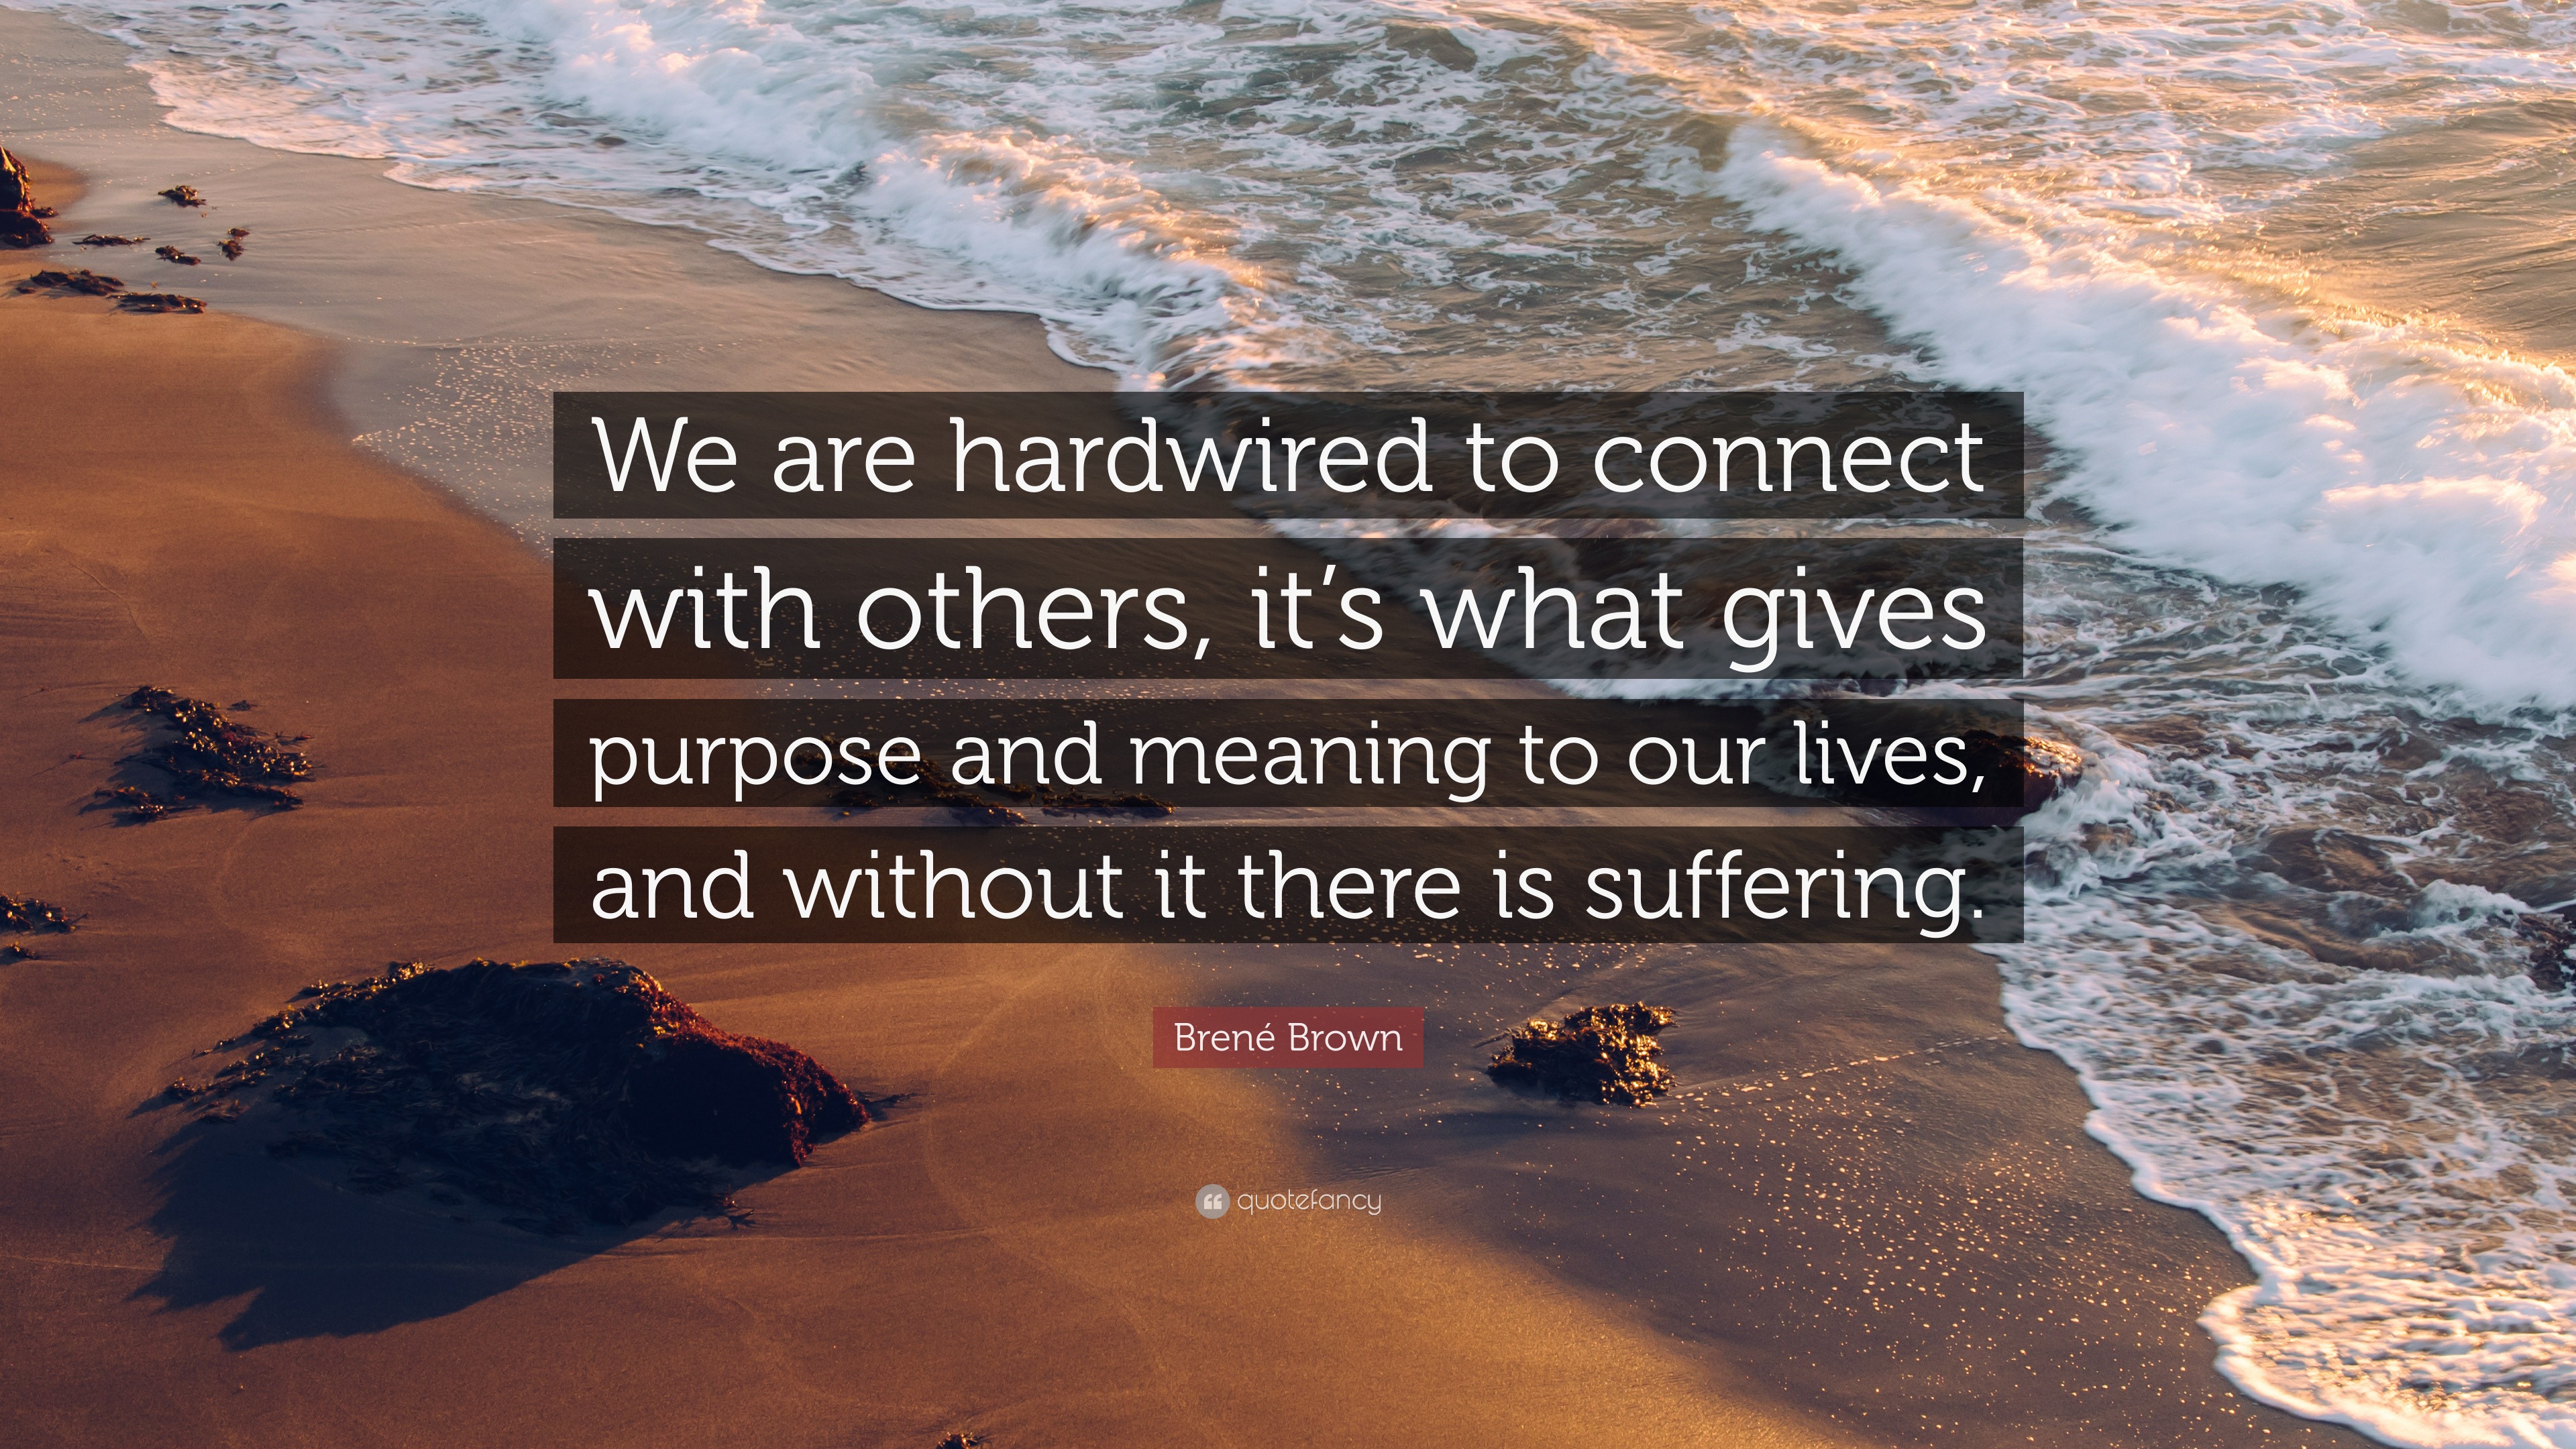 Brené Brown Quote “We are hardwired to connect with